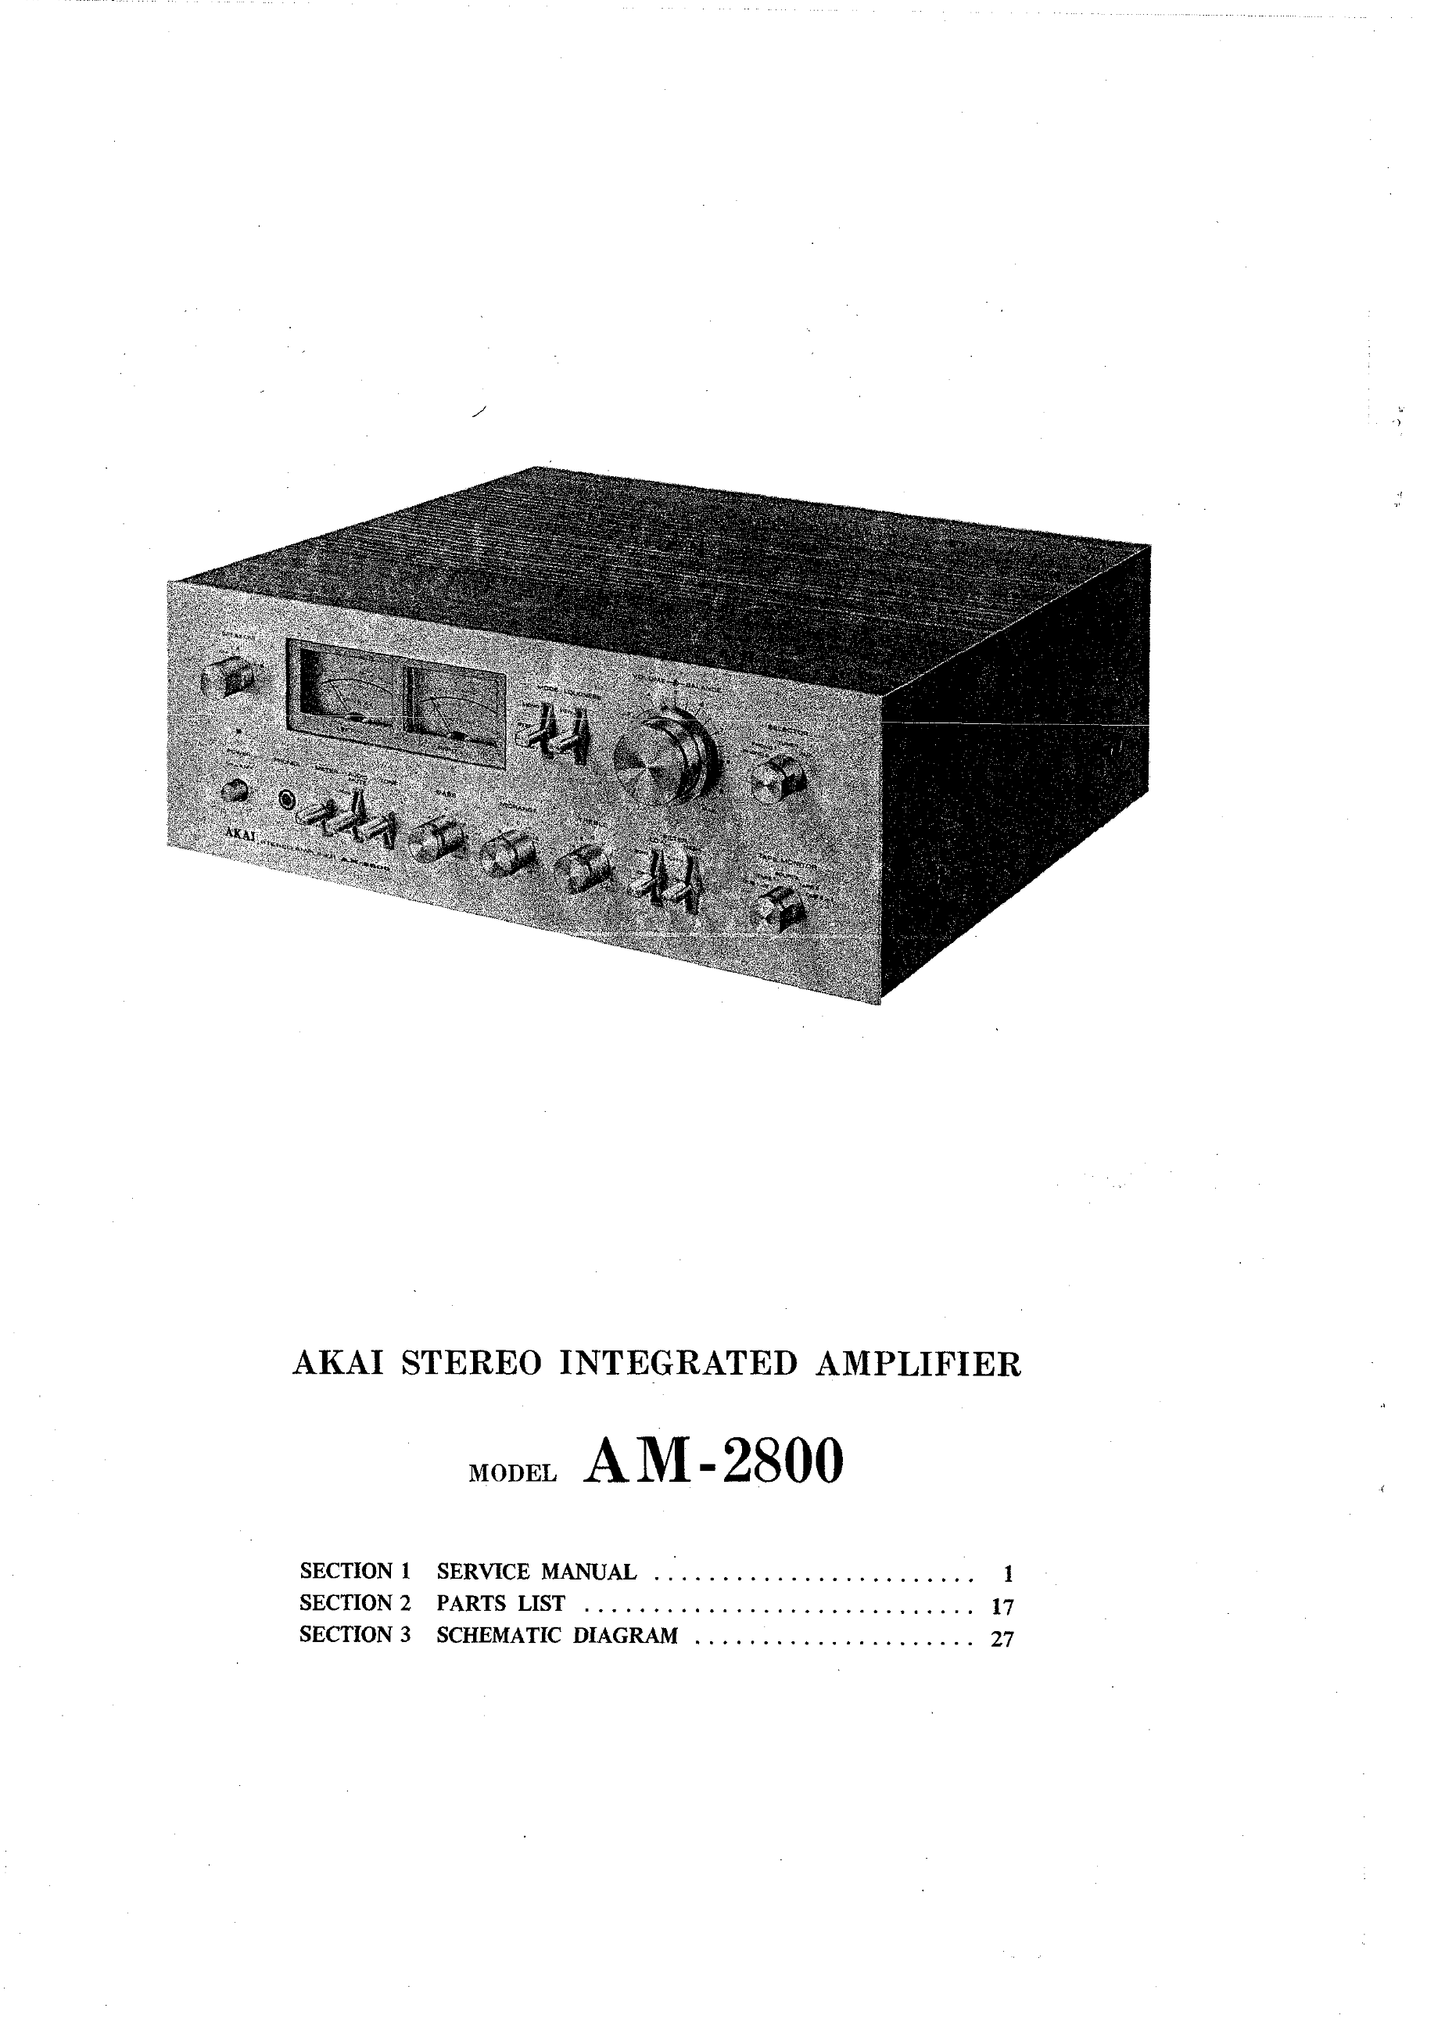 Akai AM-2800 Stereo Integrated Amplifier Service Manual (Pages: 27)